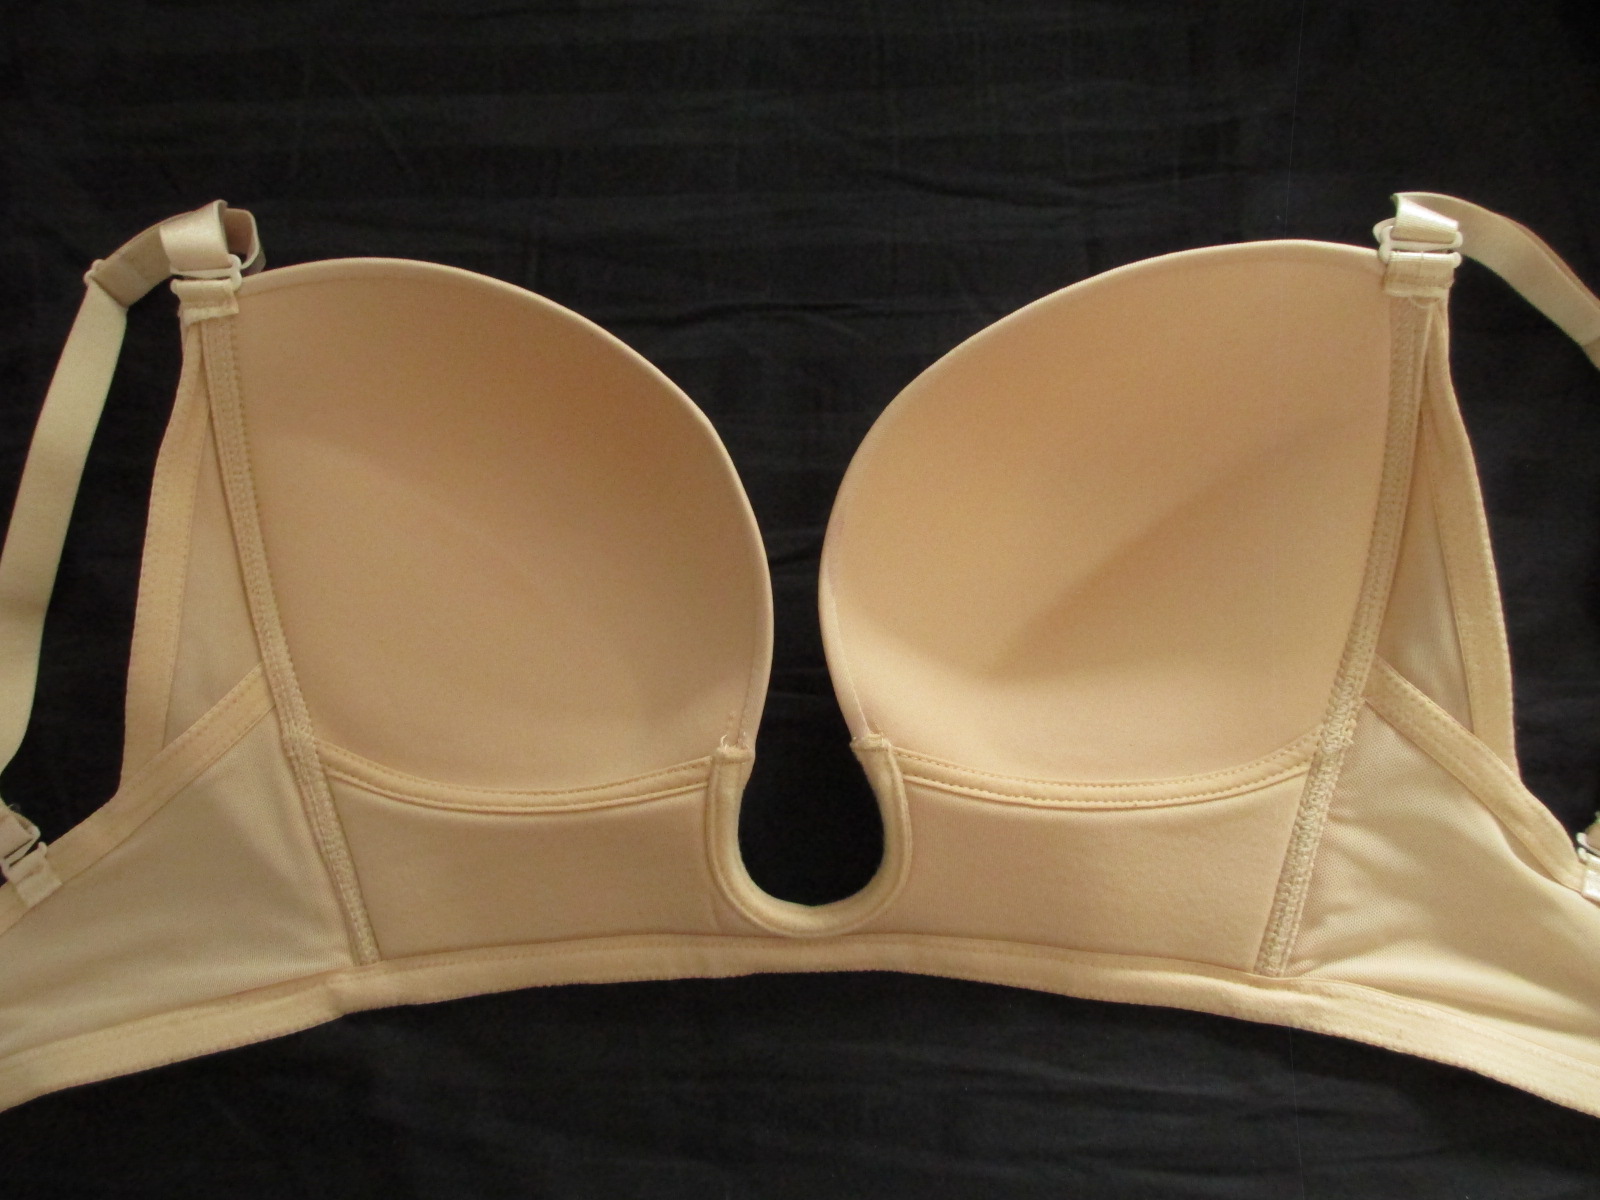 Off the Rack ~ Reviewing The Natural “Plus Size Sexy Plunge Bra” –